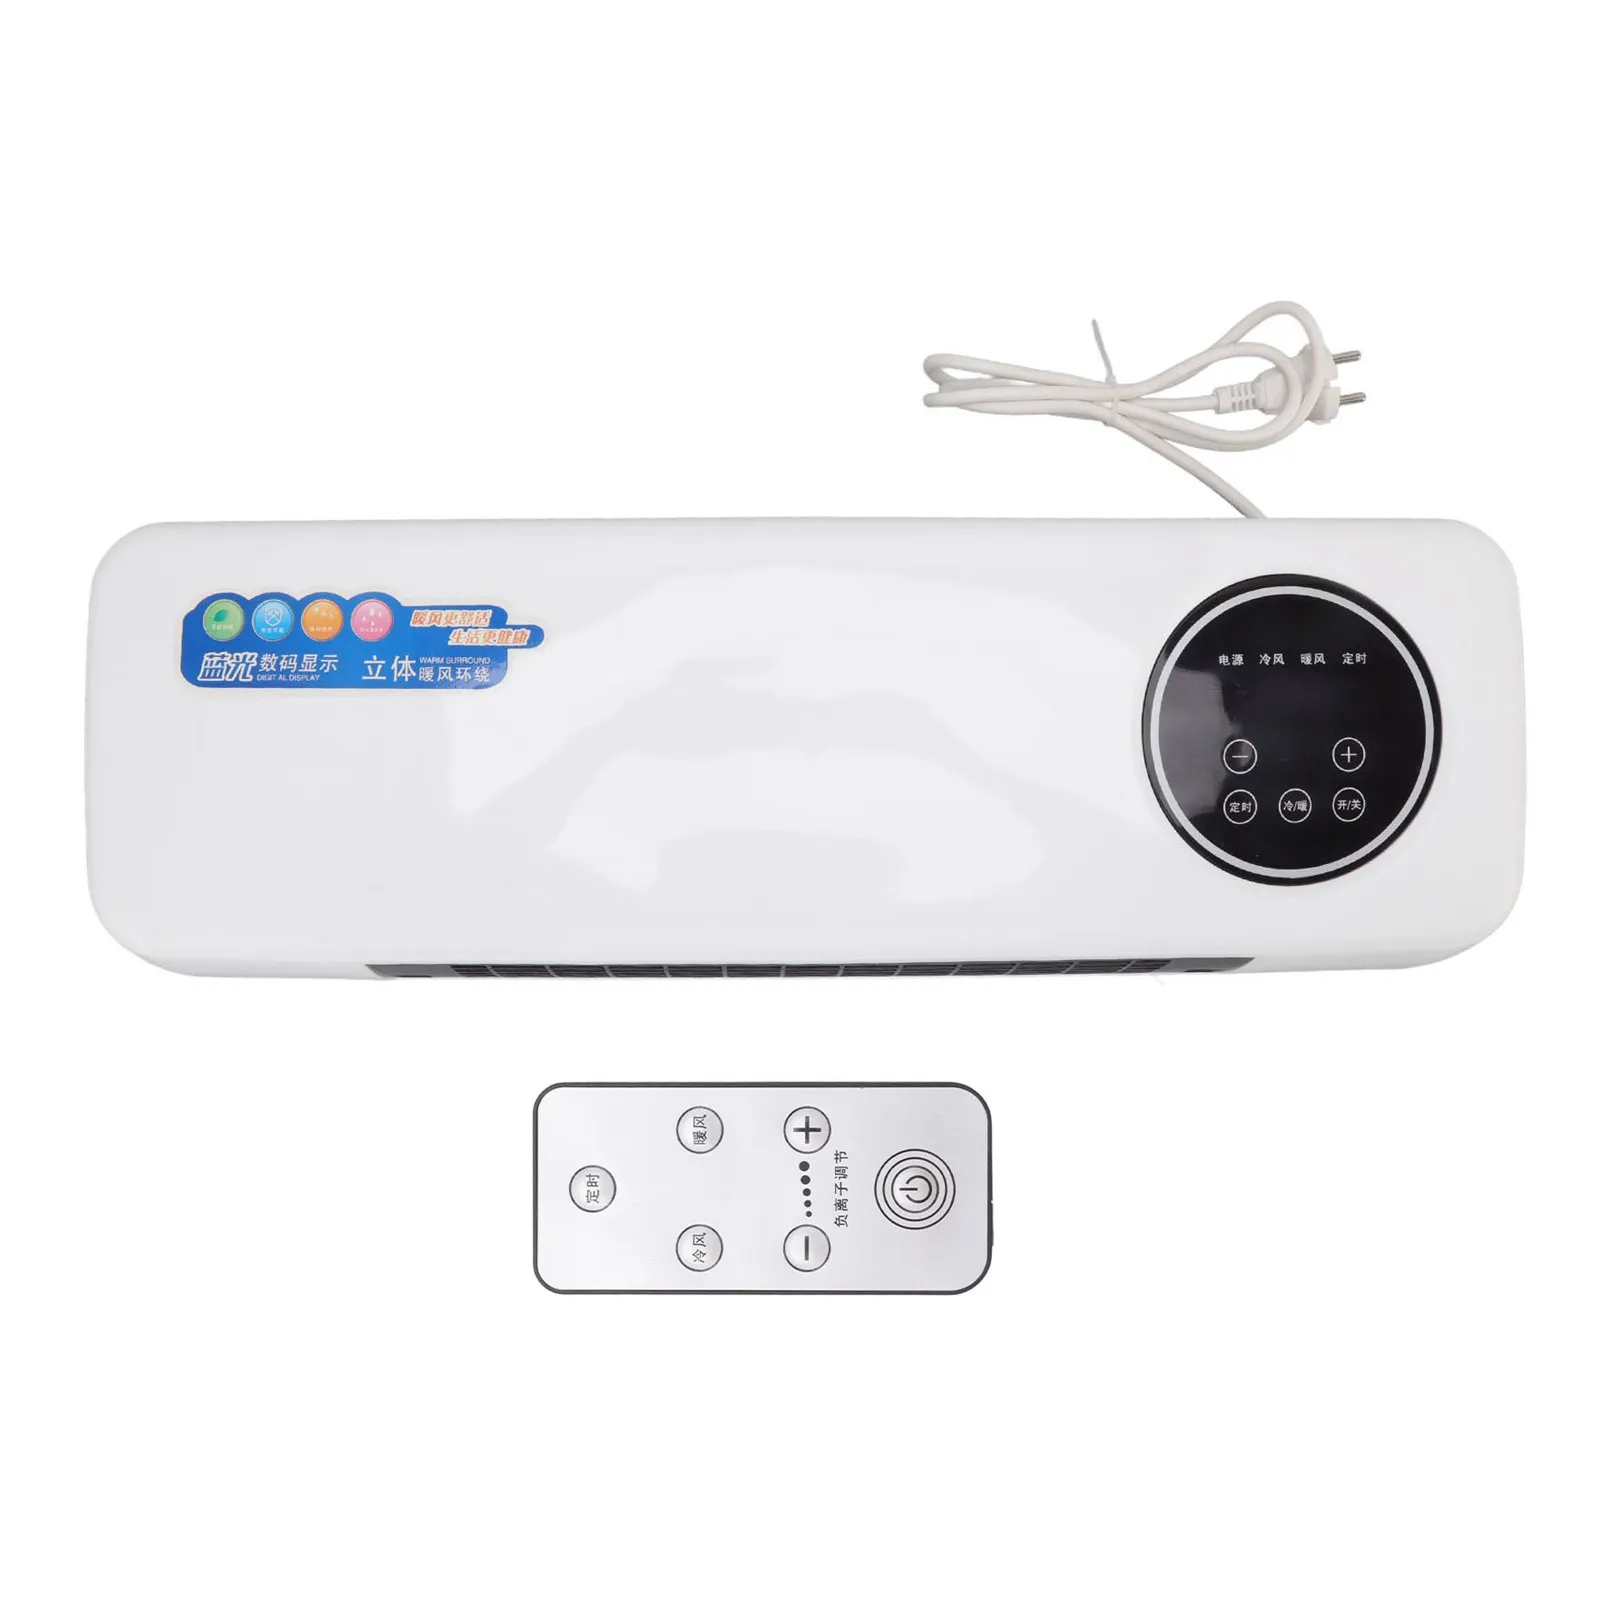 Electric Conditioner Wall Mounted Remote Control Cooling Heating Conditioner for Home EU 220V